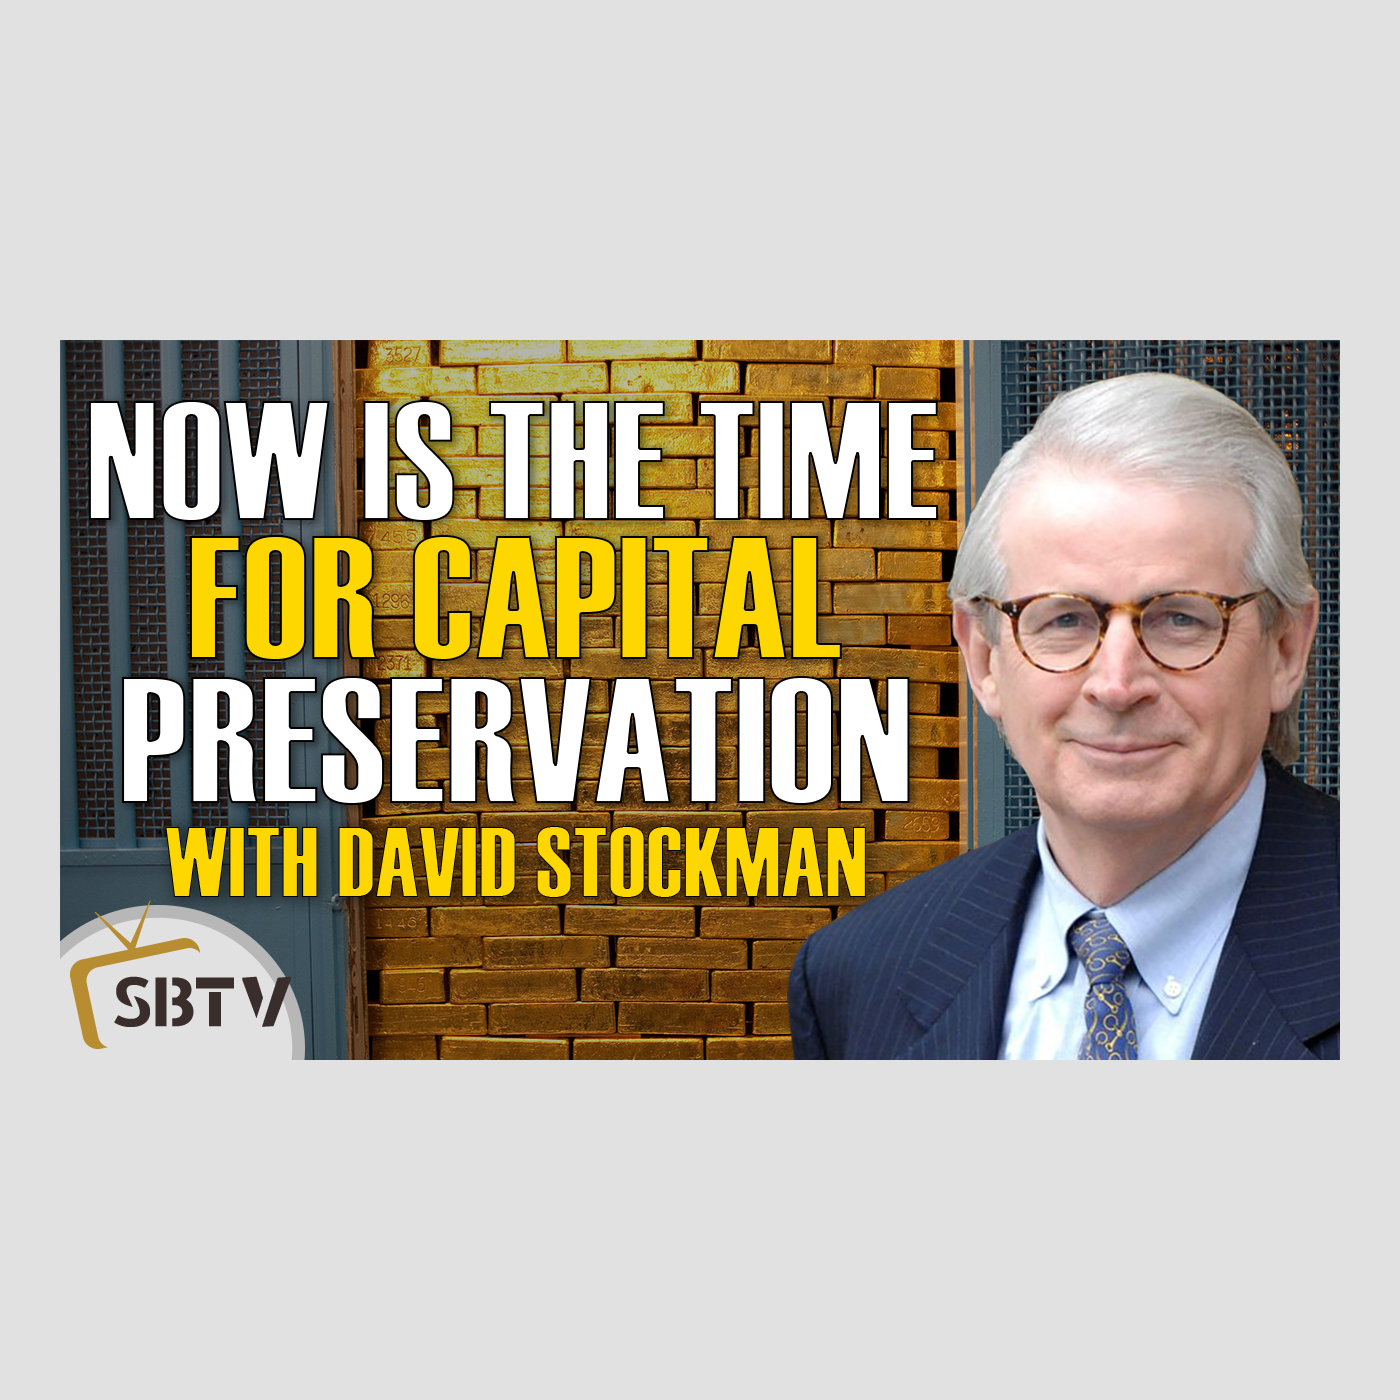 71 David Stockman - Flee The 'Casino' Market, Now Is The Time For Capital Preservation